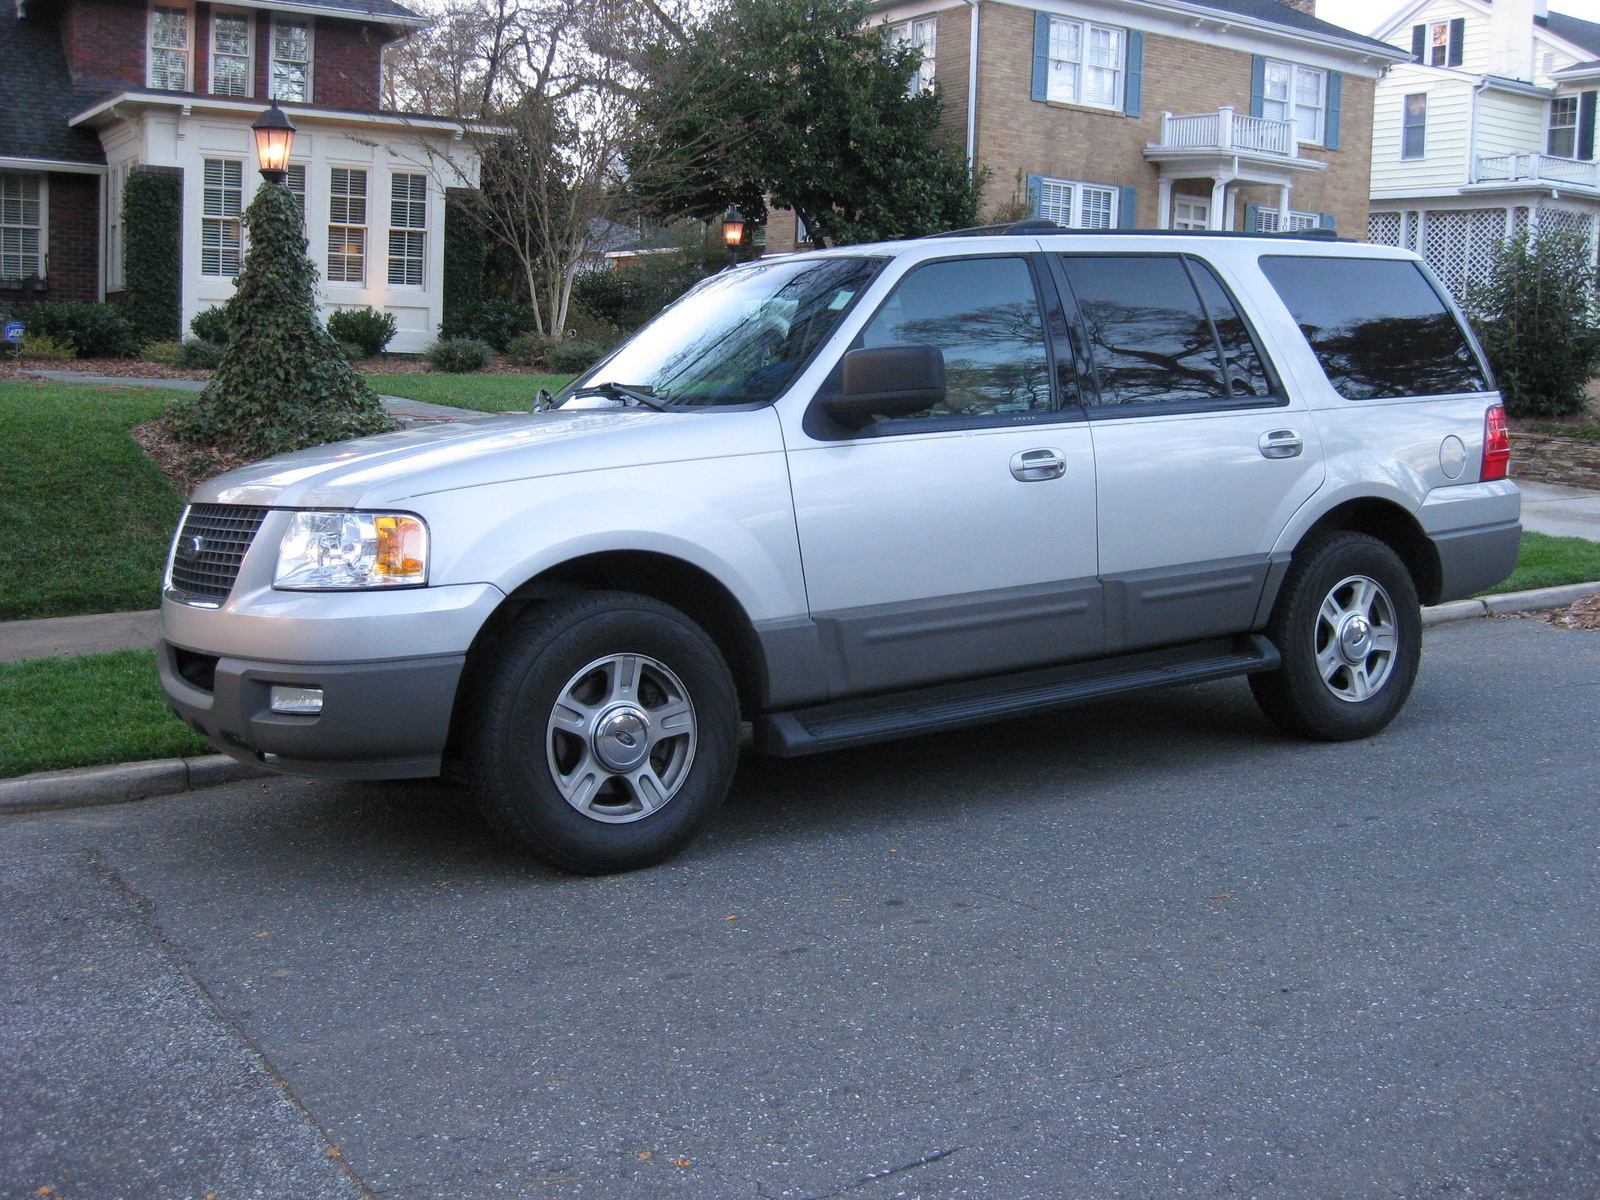 2003 Ford expedition exterior dimensions #2